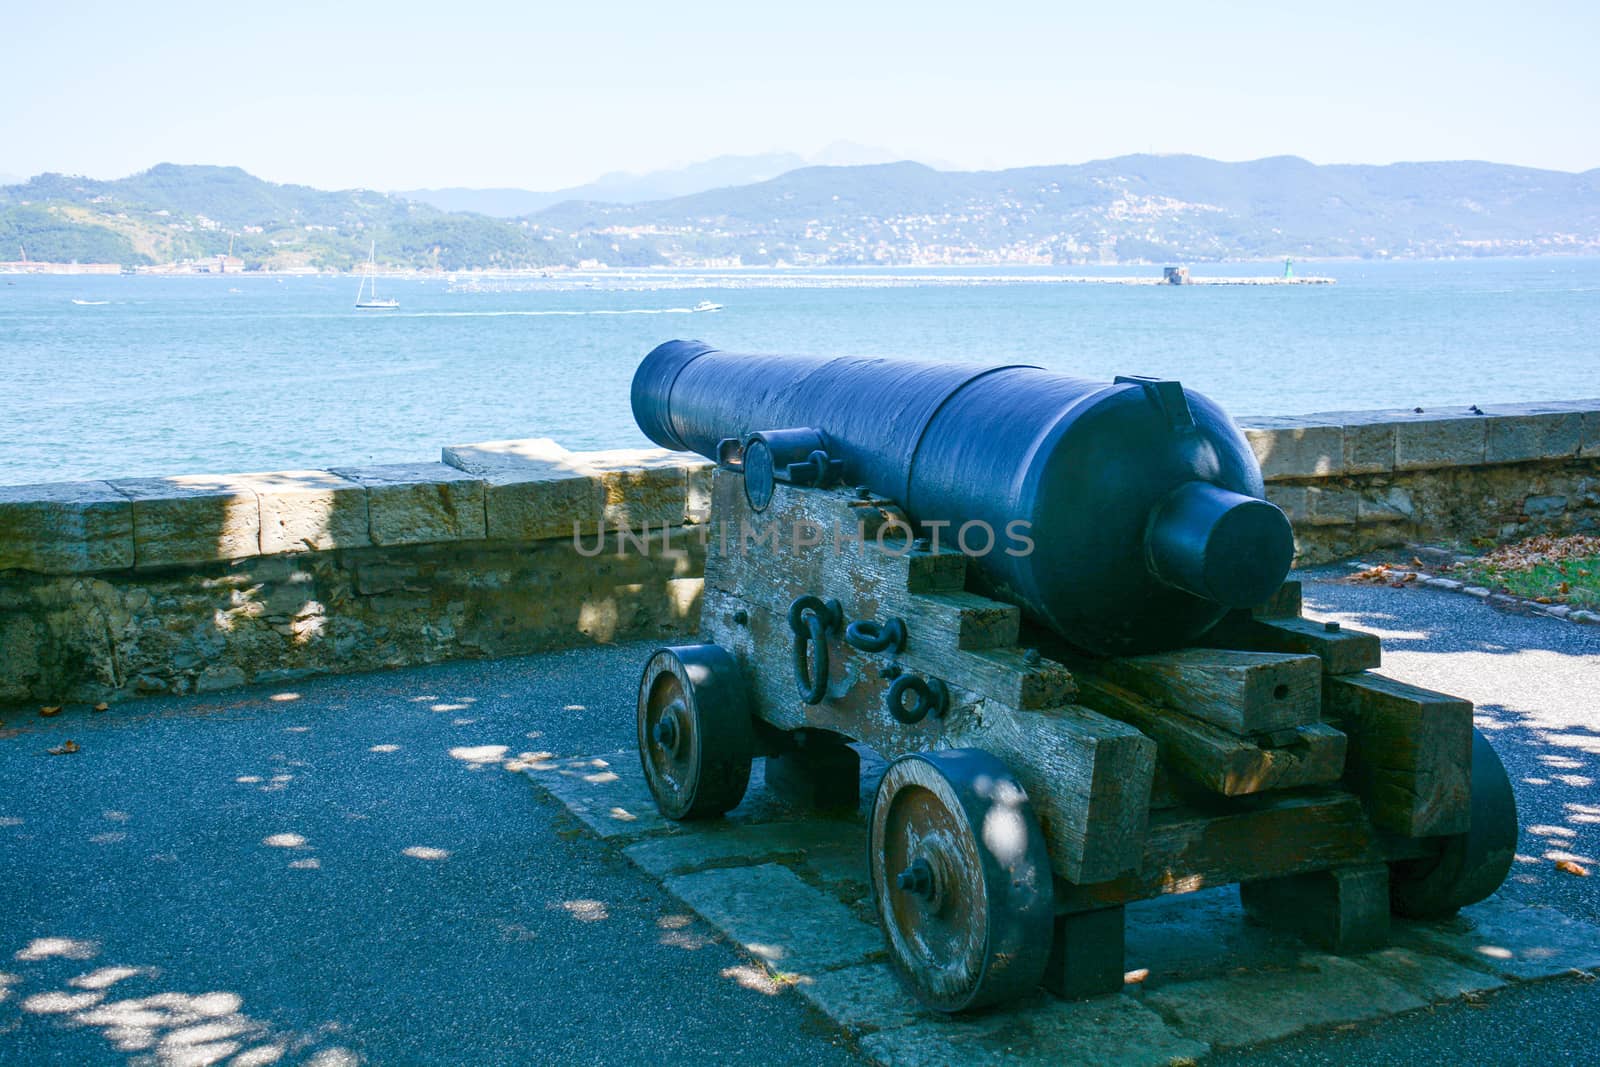 ancient cannon for castel and coast defense